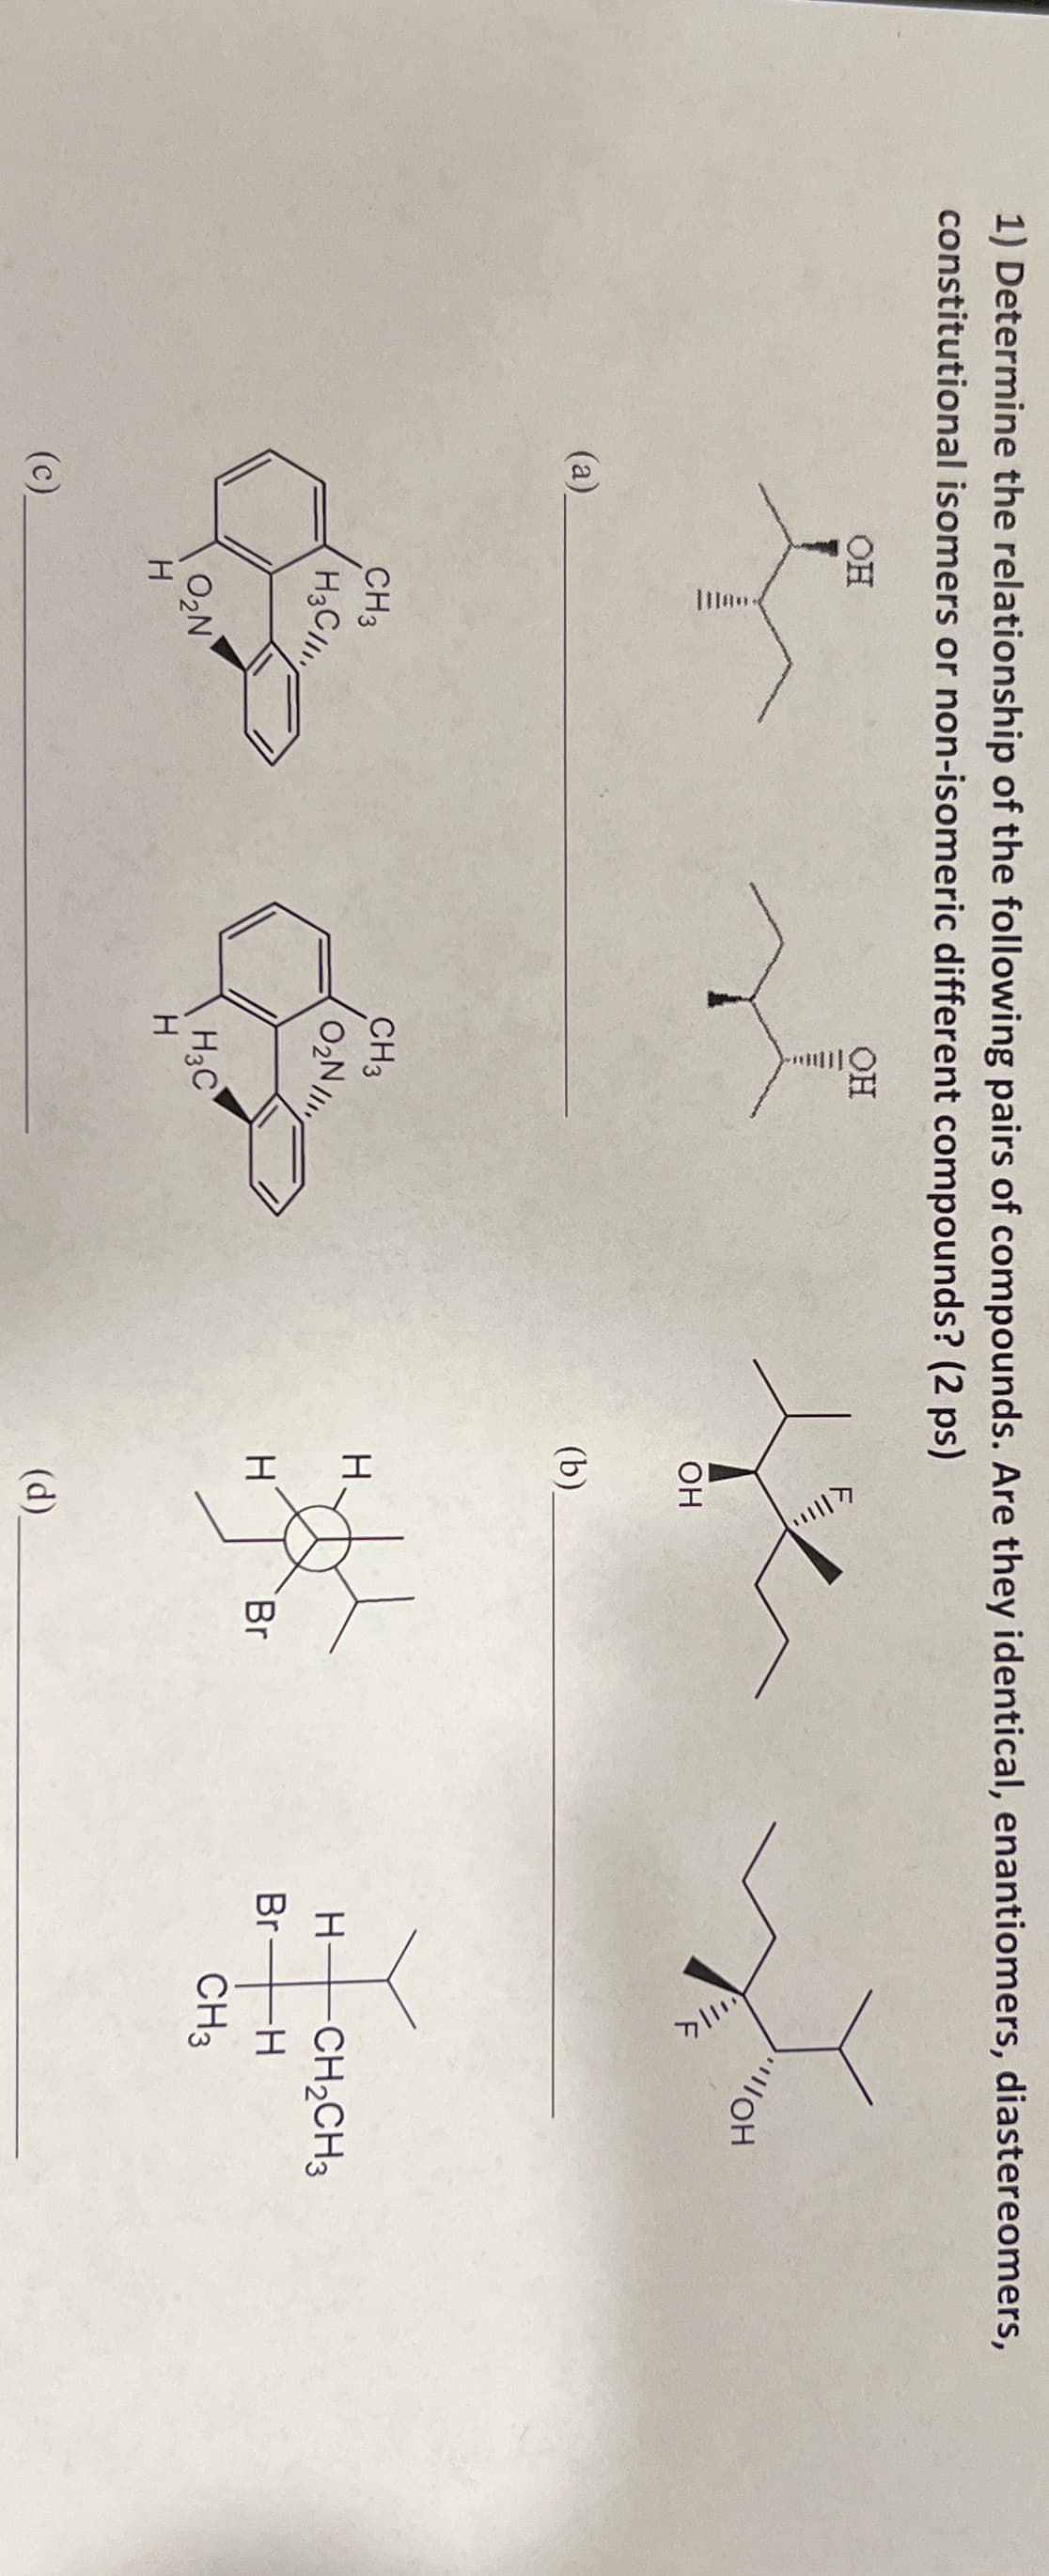 1) Determine the relationship of the following pairs of compounds. Are they identical, enantiomers, diastereomers,
constitutional isomers or non-isomeric different compounds? (2 ps)
(a)
(c)
OH
OH
OH
(b).
OH
CH3
H3C
CH3
O₂N
H
H-
CH2CH3
Br
-H
H
Br
CH3
H3C
O₂N
H
H
(d)